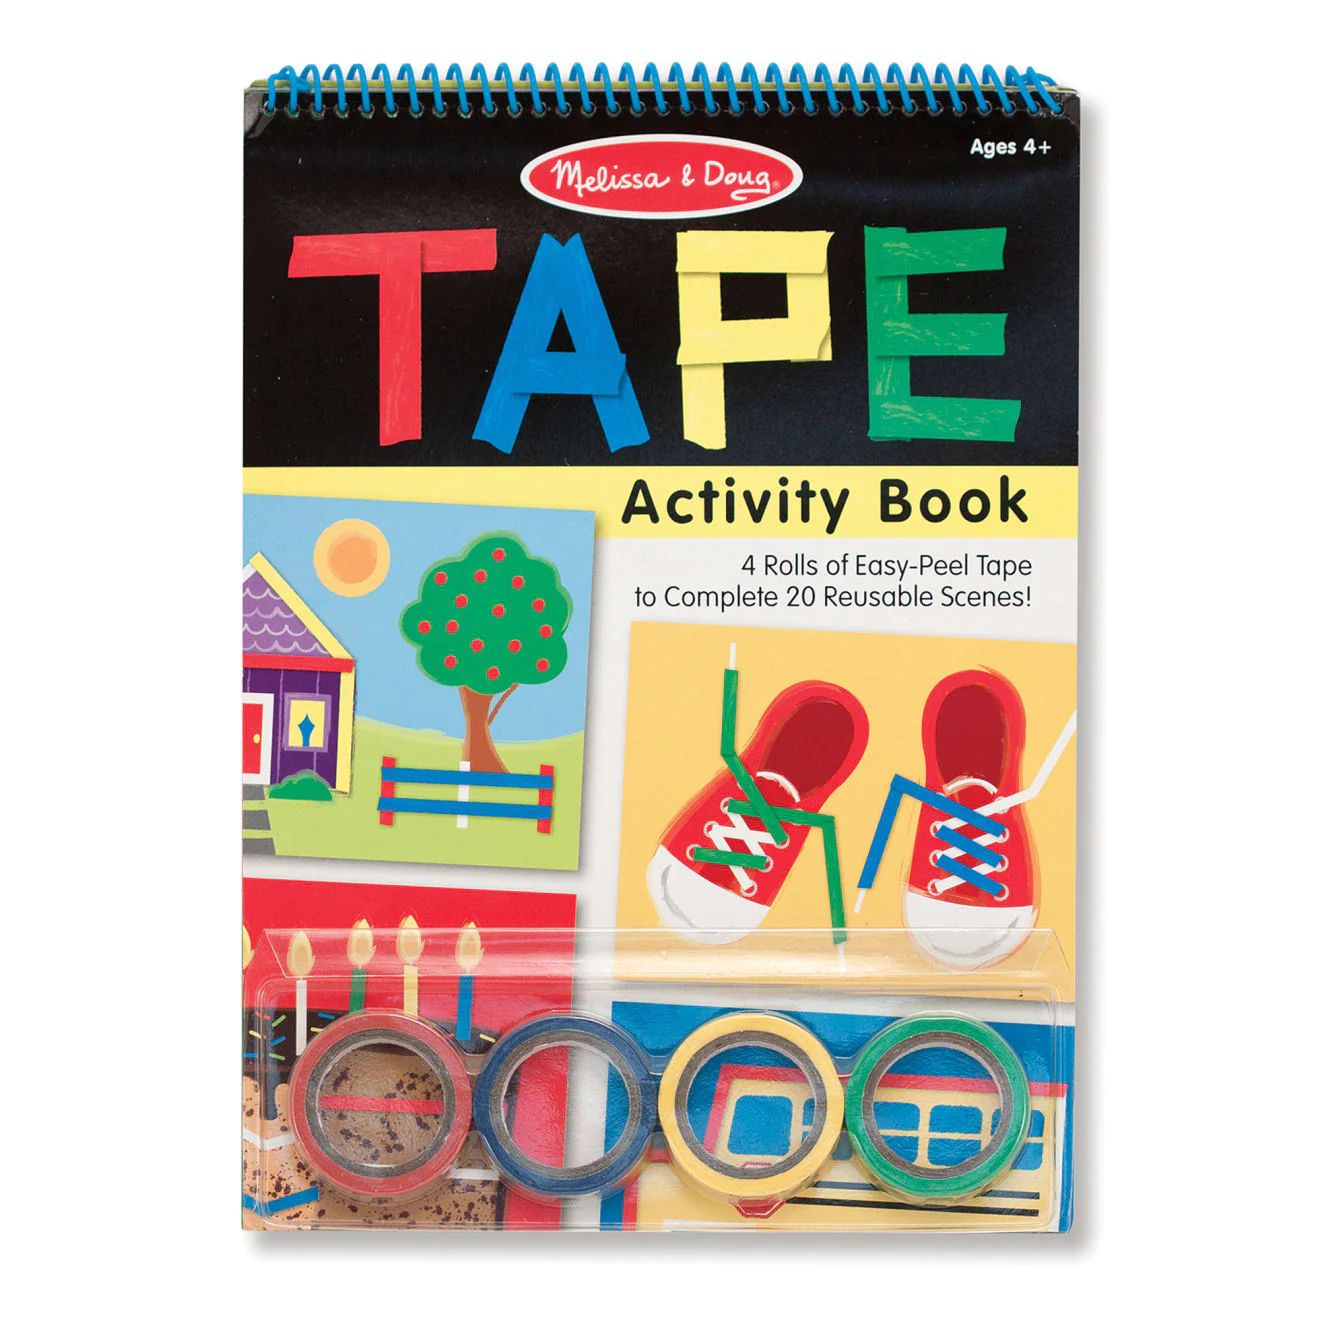 Tape Activity Book | Melissa and Doug